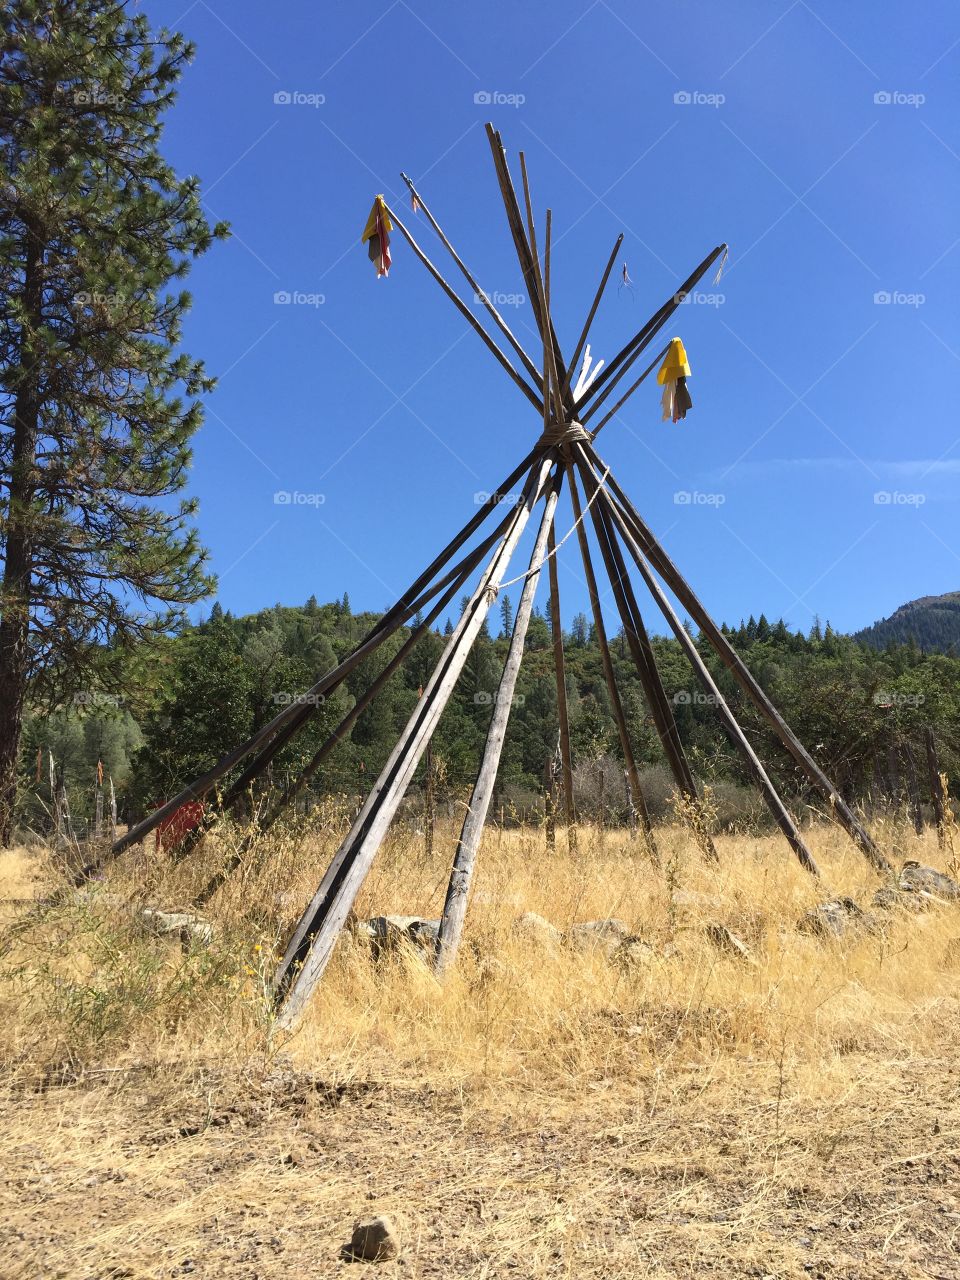 Teepee. Trinity National Forest hike trails with trees, bushes, plants and dirt! 